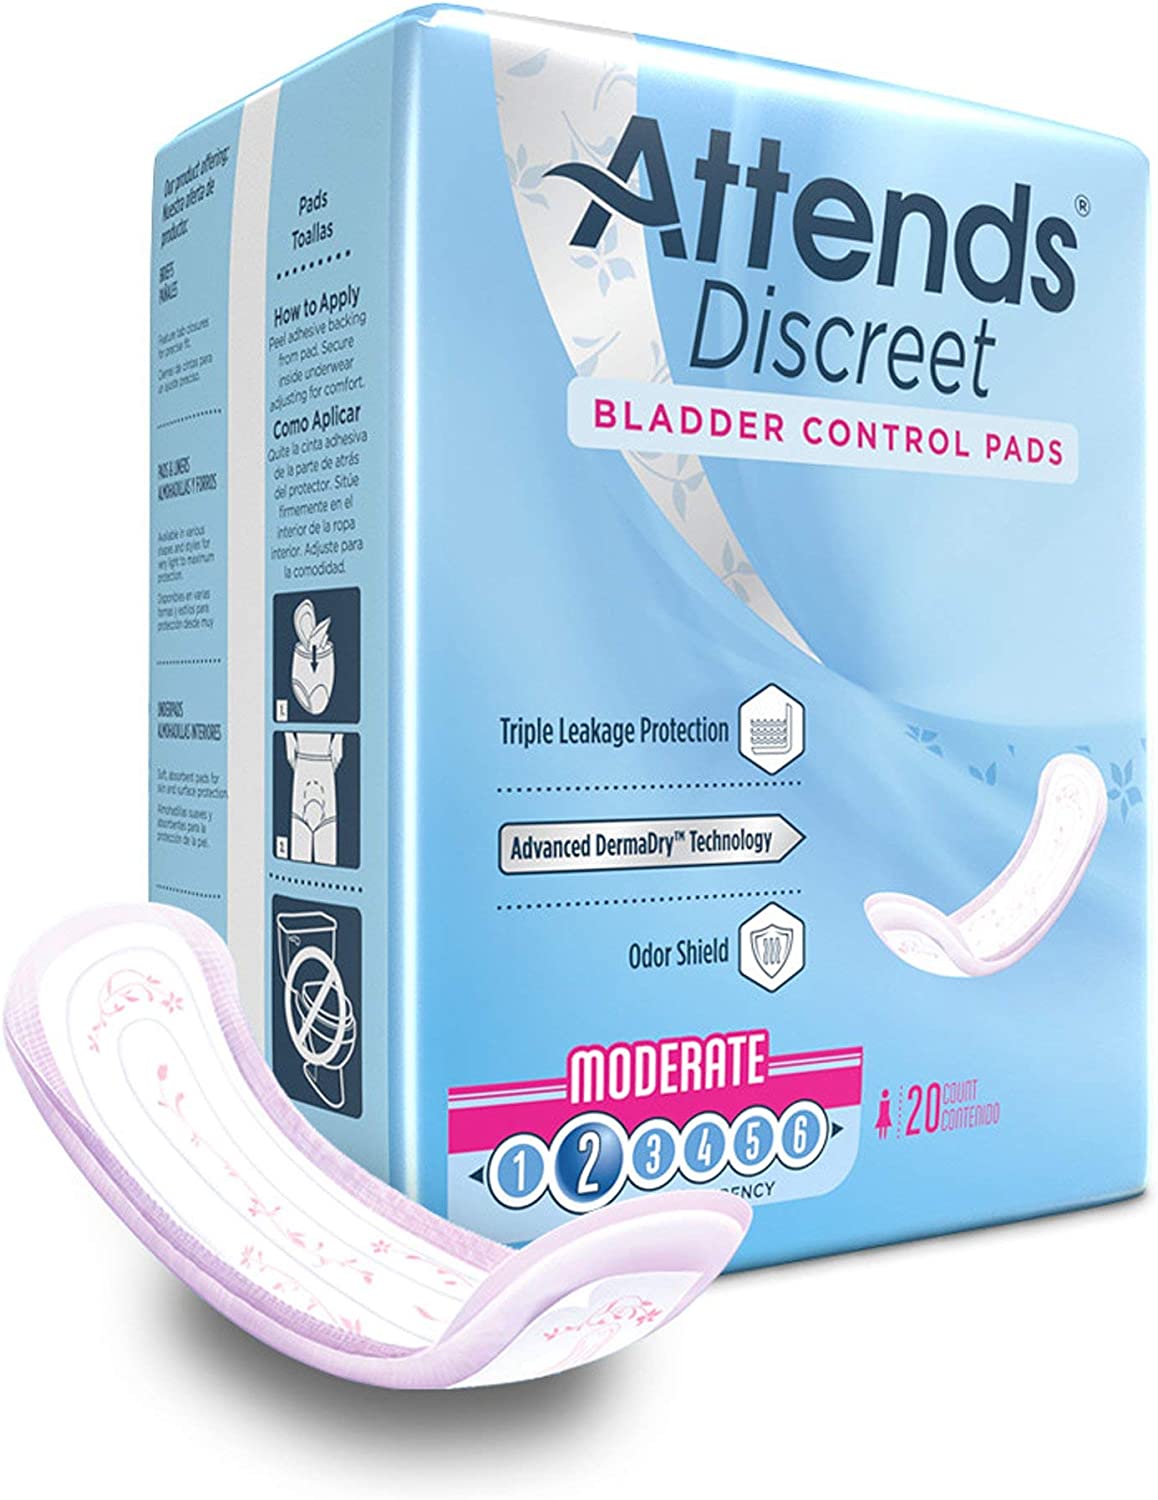 Attends Discreet Bladder Control Pads, Moderate Absorbency Liner Pads, ADPMOD – Pack of 20